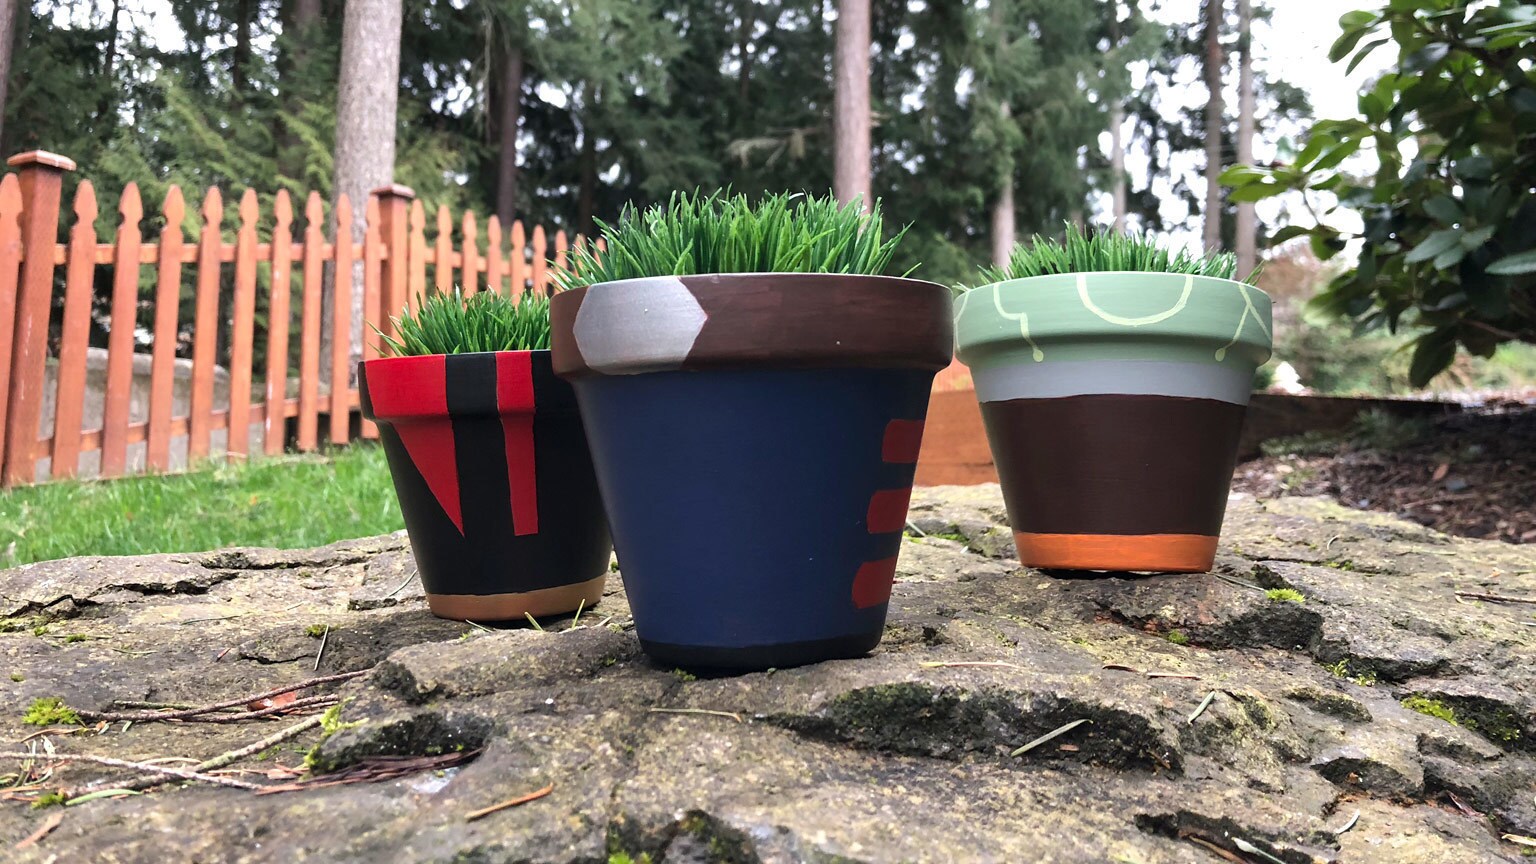 Paint the Best Star Pilot Planters in the Galaxy